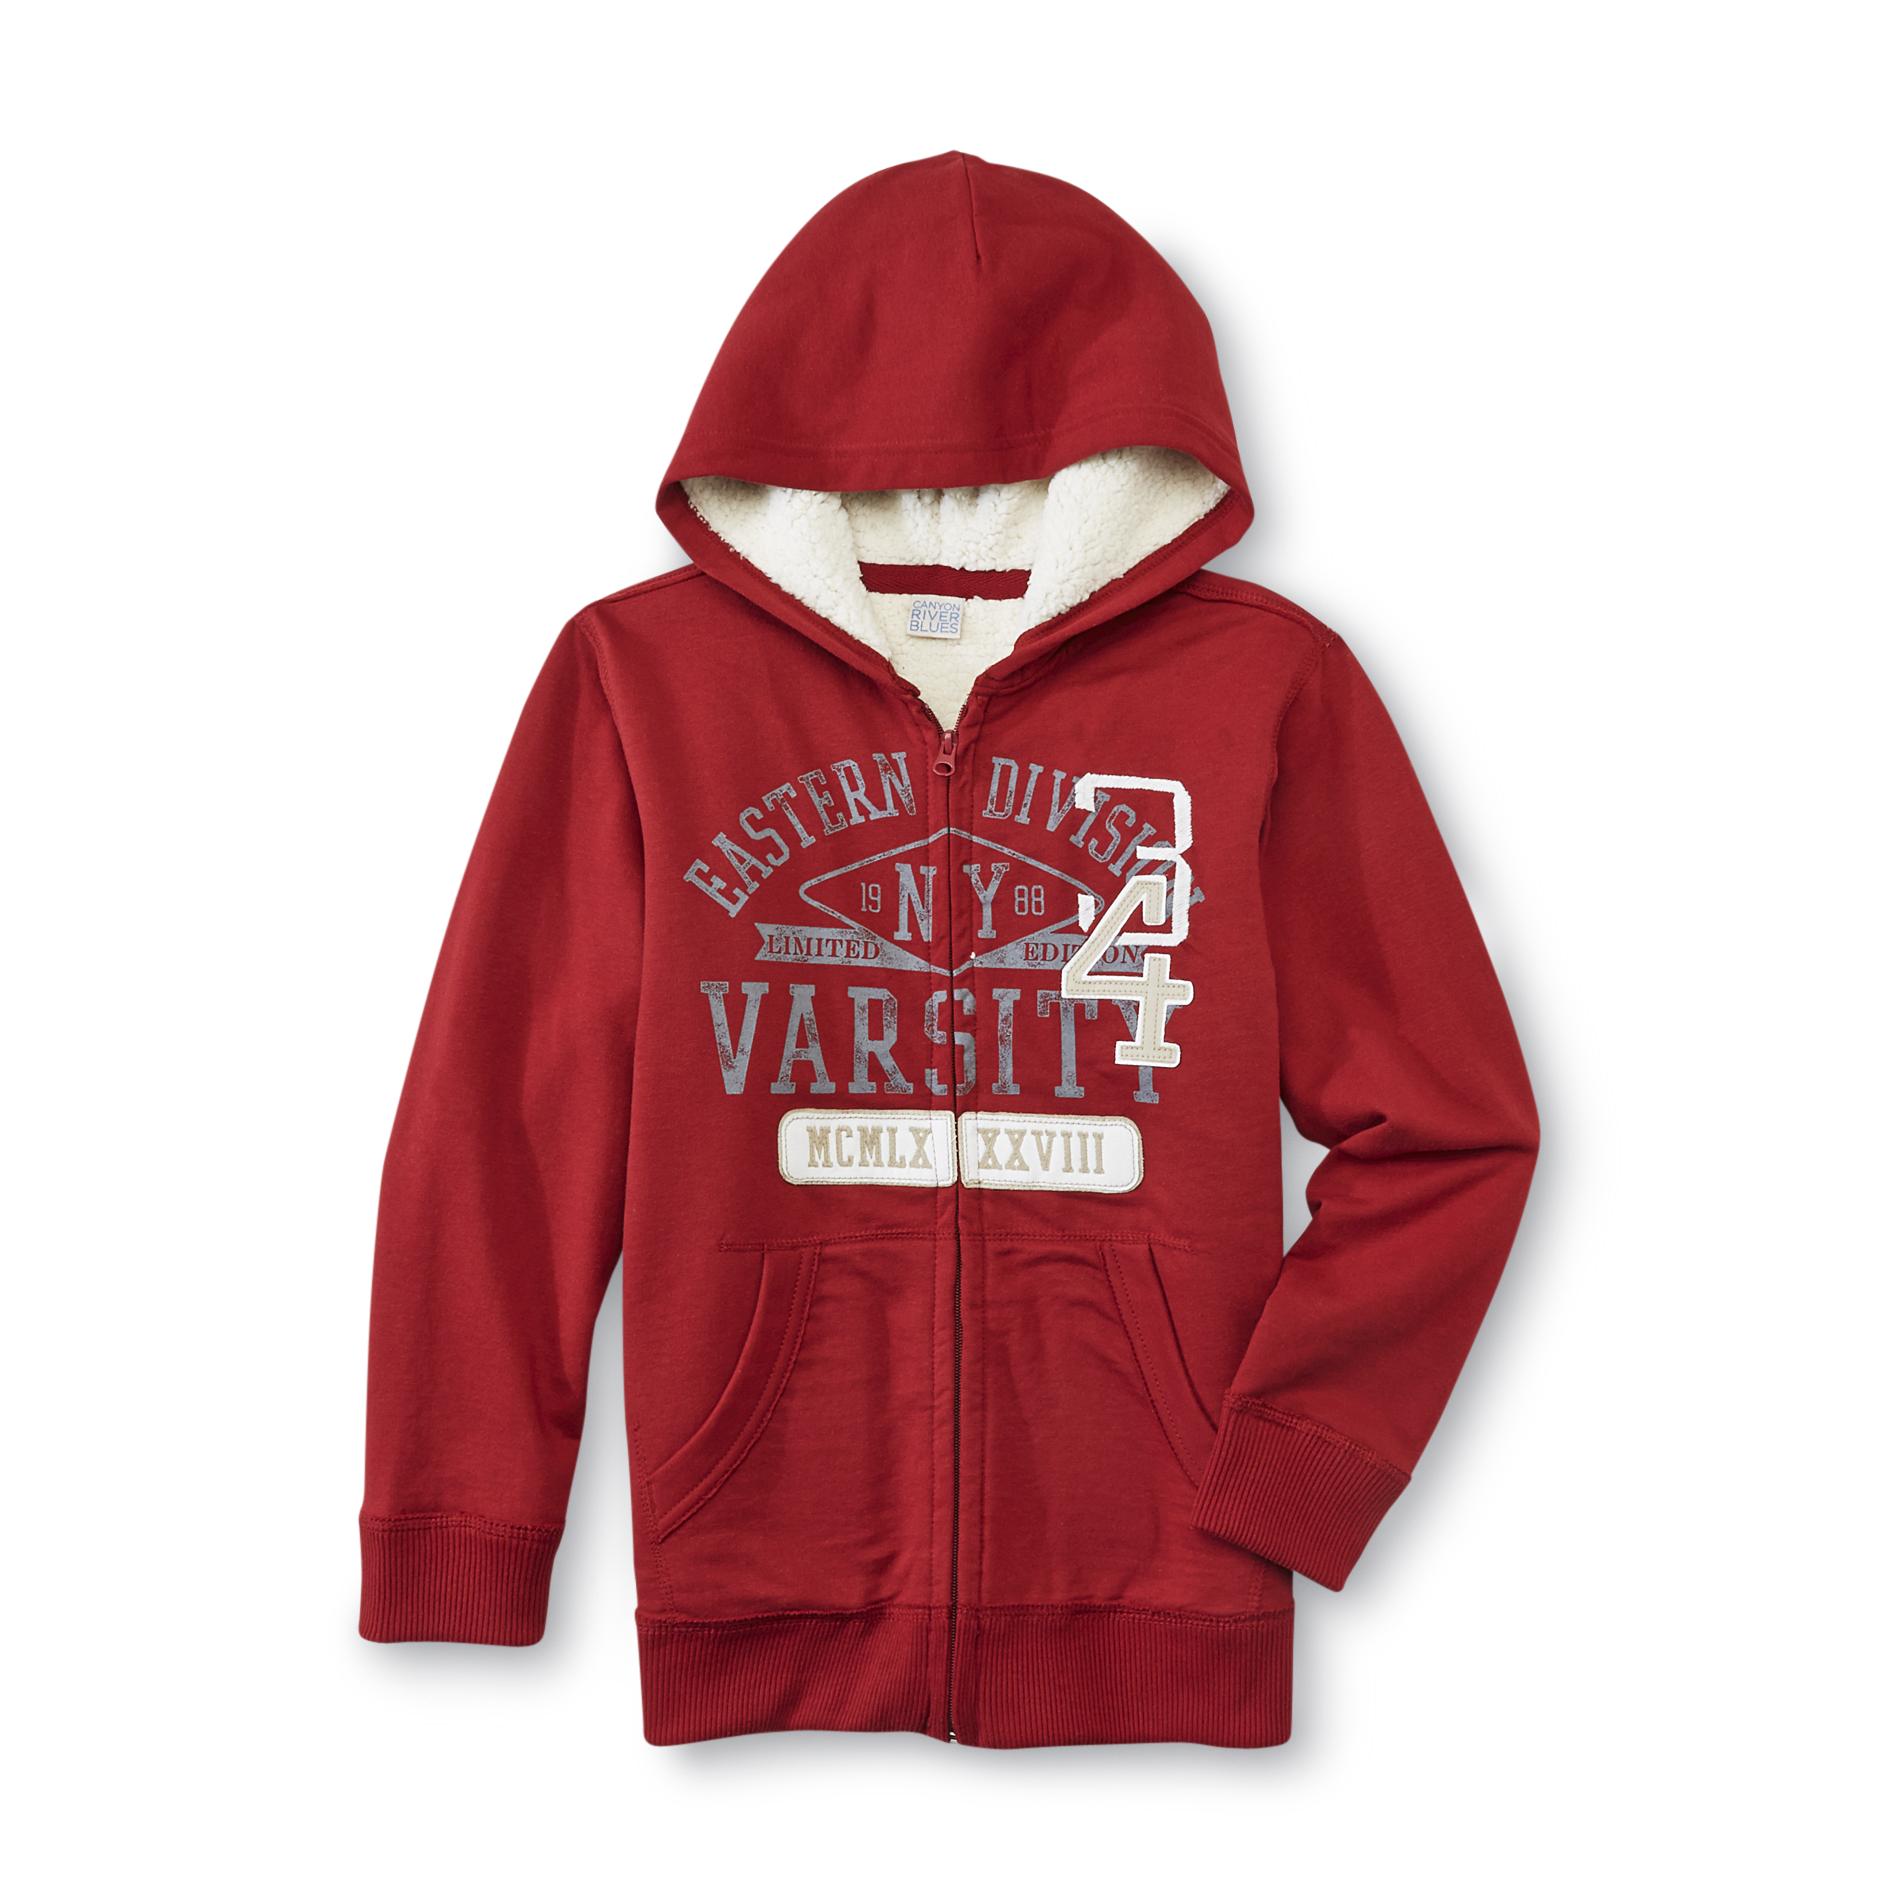 Canyon River Blues Boy's Graphic Hoodie Jacket - Varsity